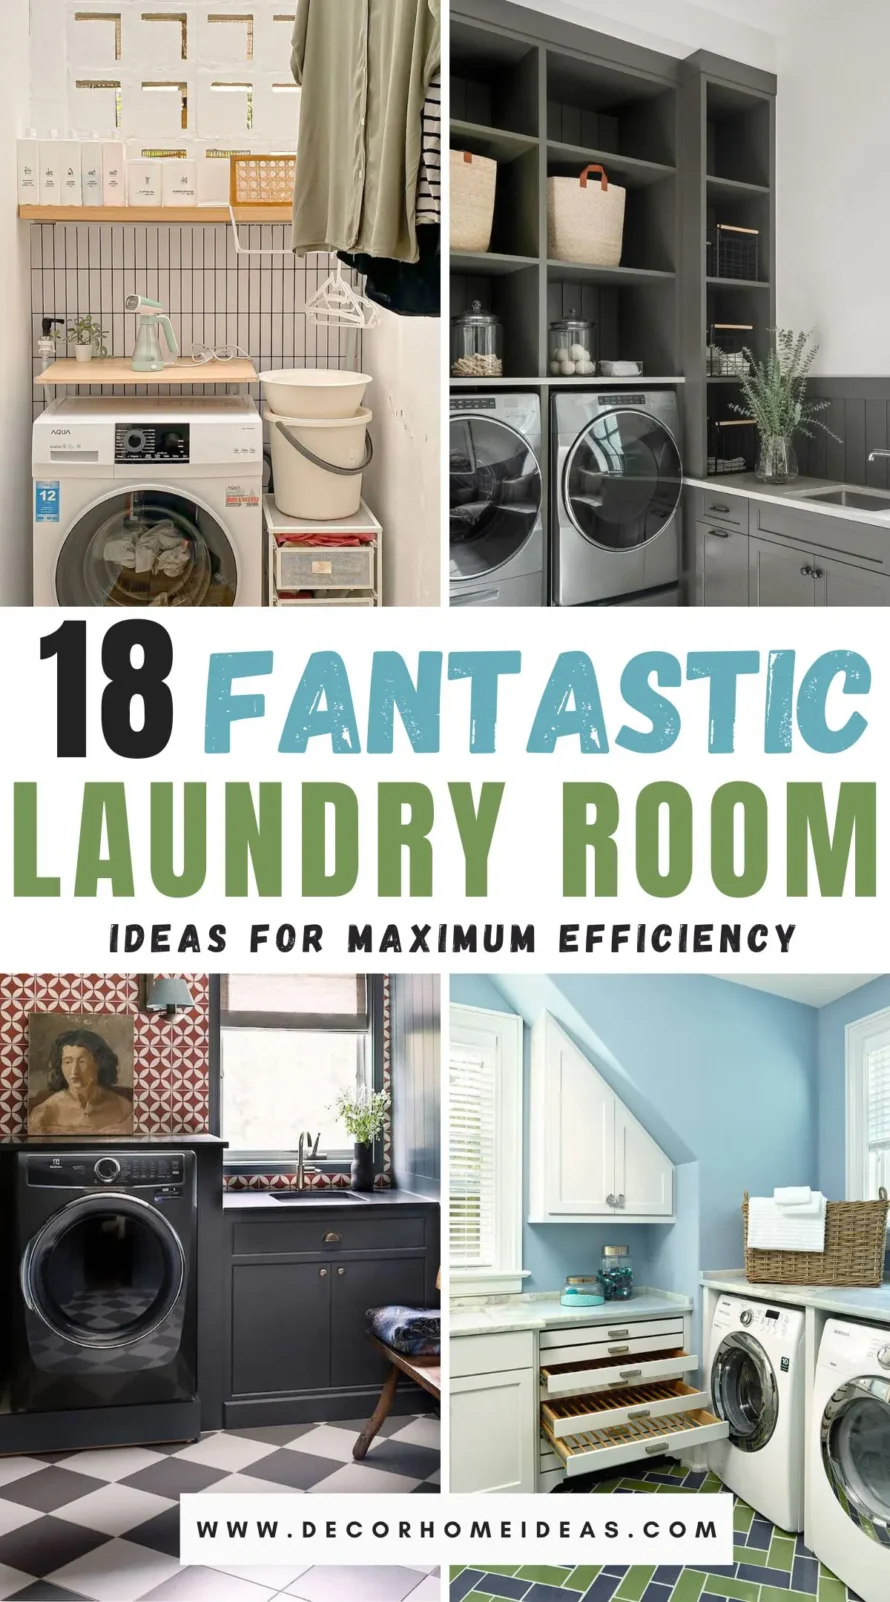 Elevate your laundry room with these 18 fantastic ideas that promise to transform it into your favorite space. From clever storage solutions to stylish decor, these designs offer inspiration for creating a functional and inviting laundry area.